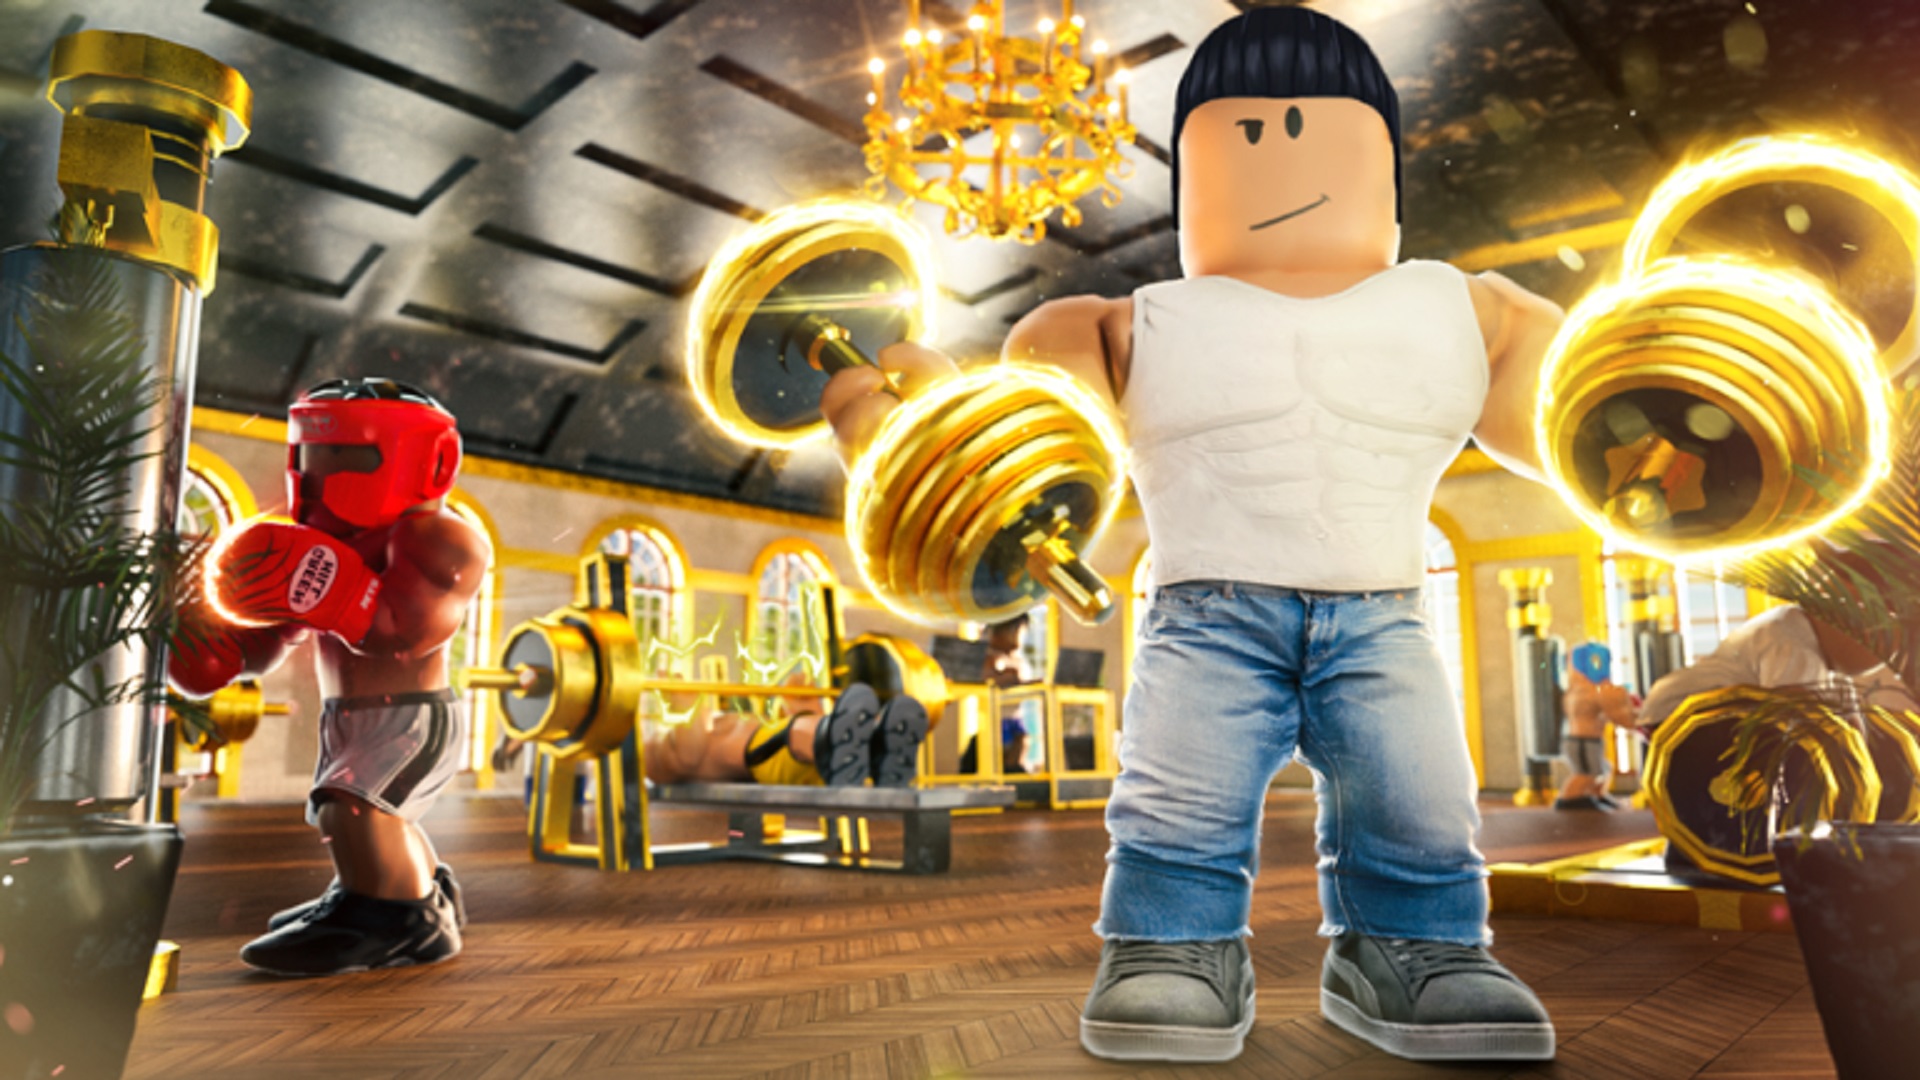 Roblox Tower Blitz Codes for December 2022: Free Coins